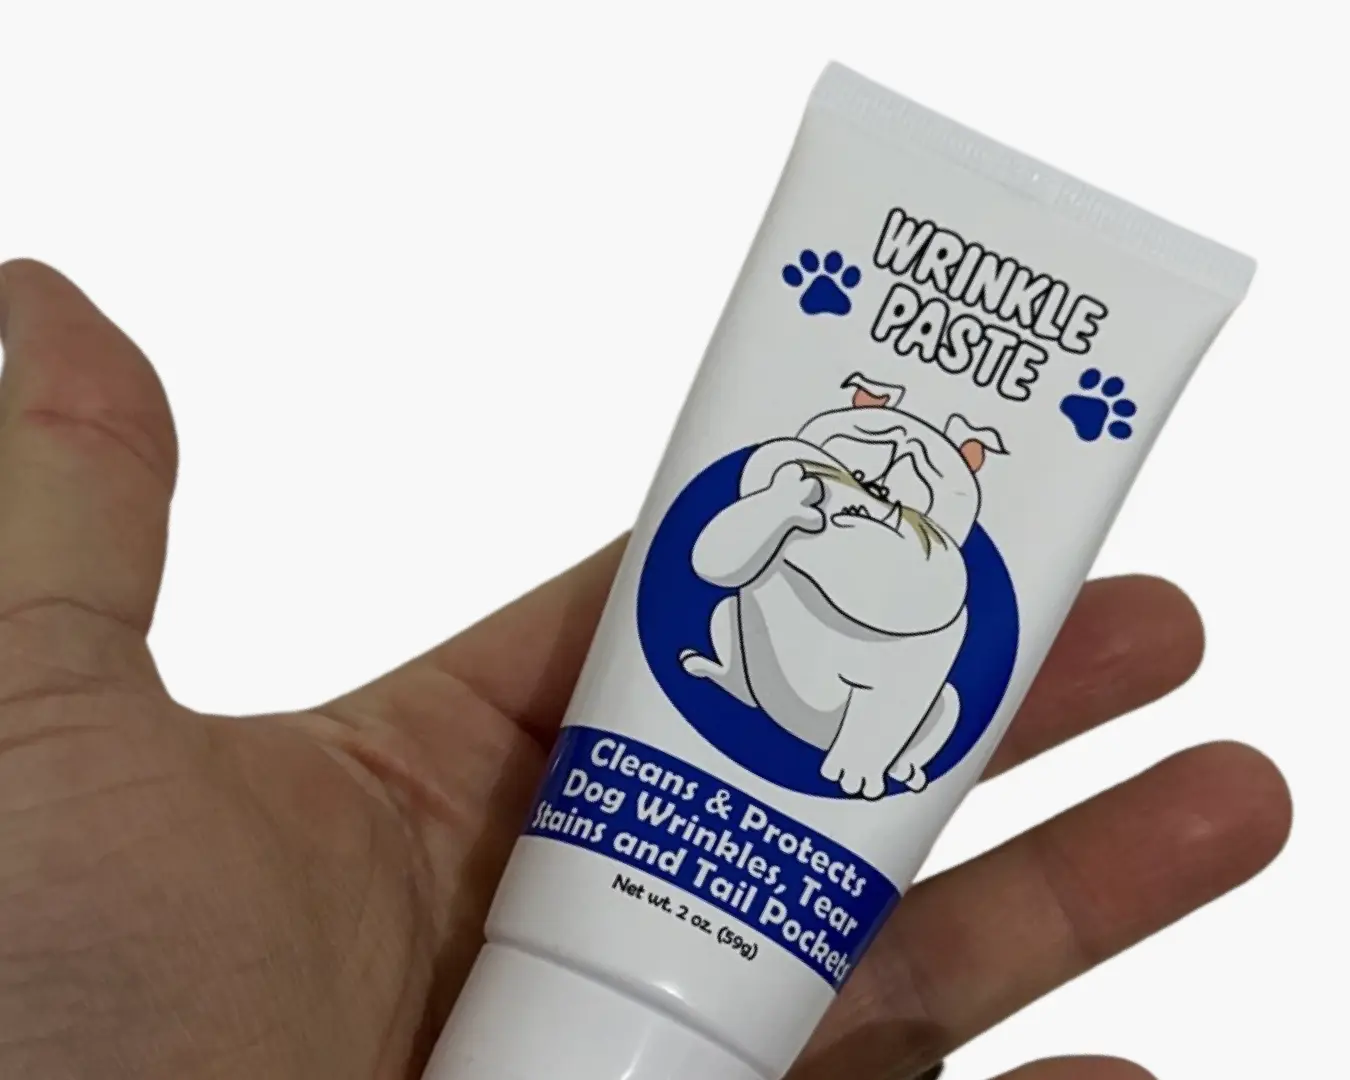 Furrimals - best tear stain remover for English bulldogs